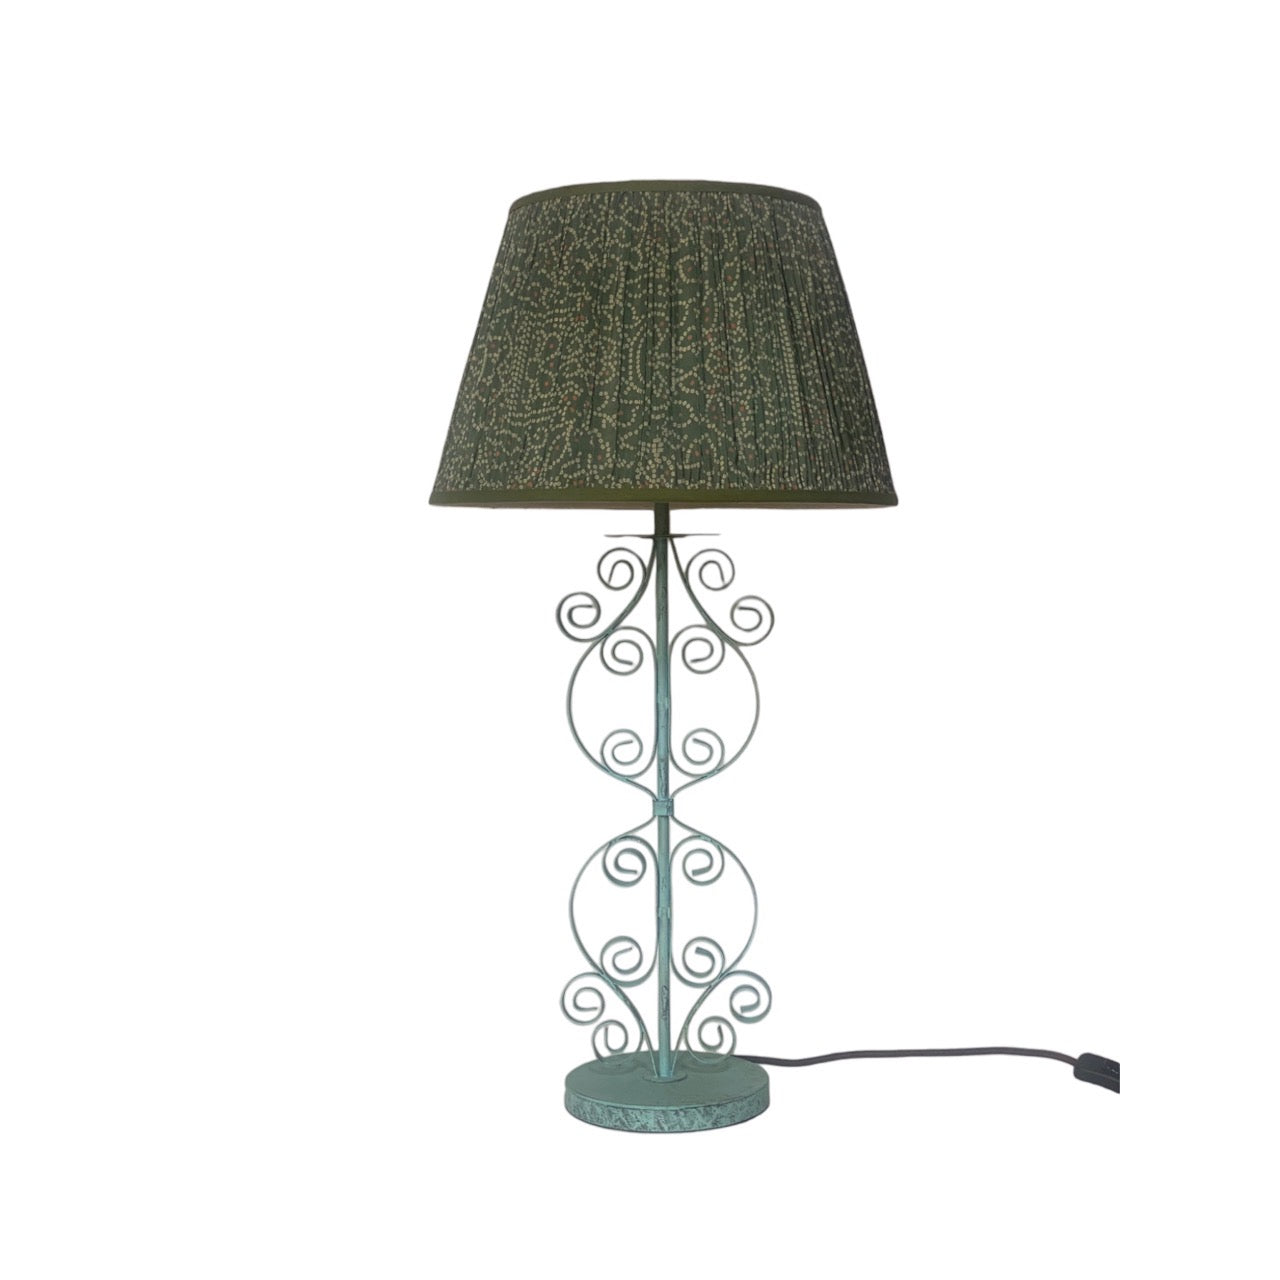 Manali curly table lamp with Teal Bangla lampshade